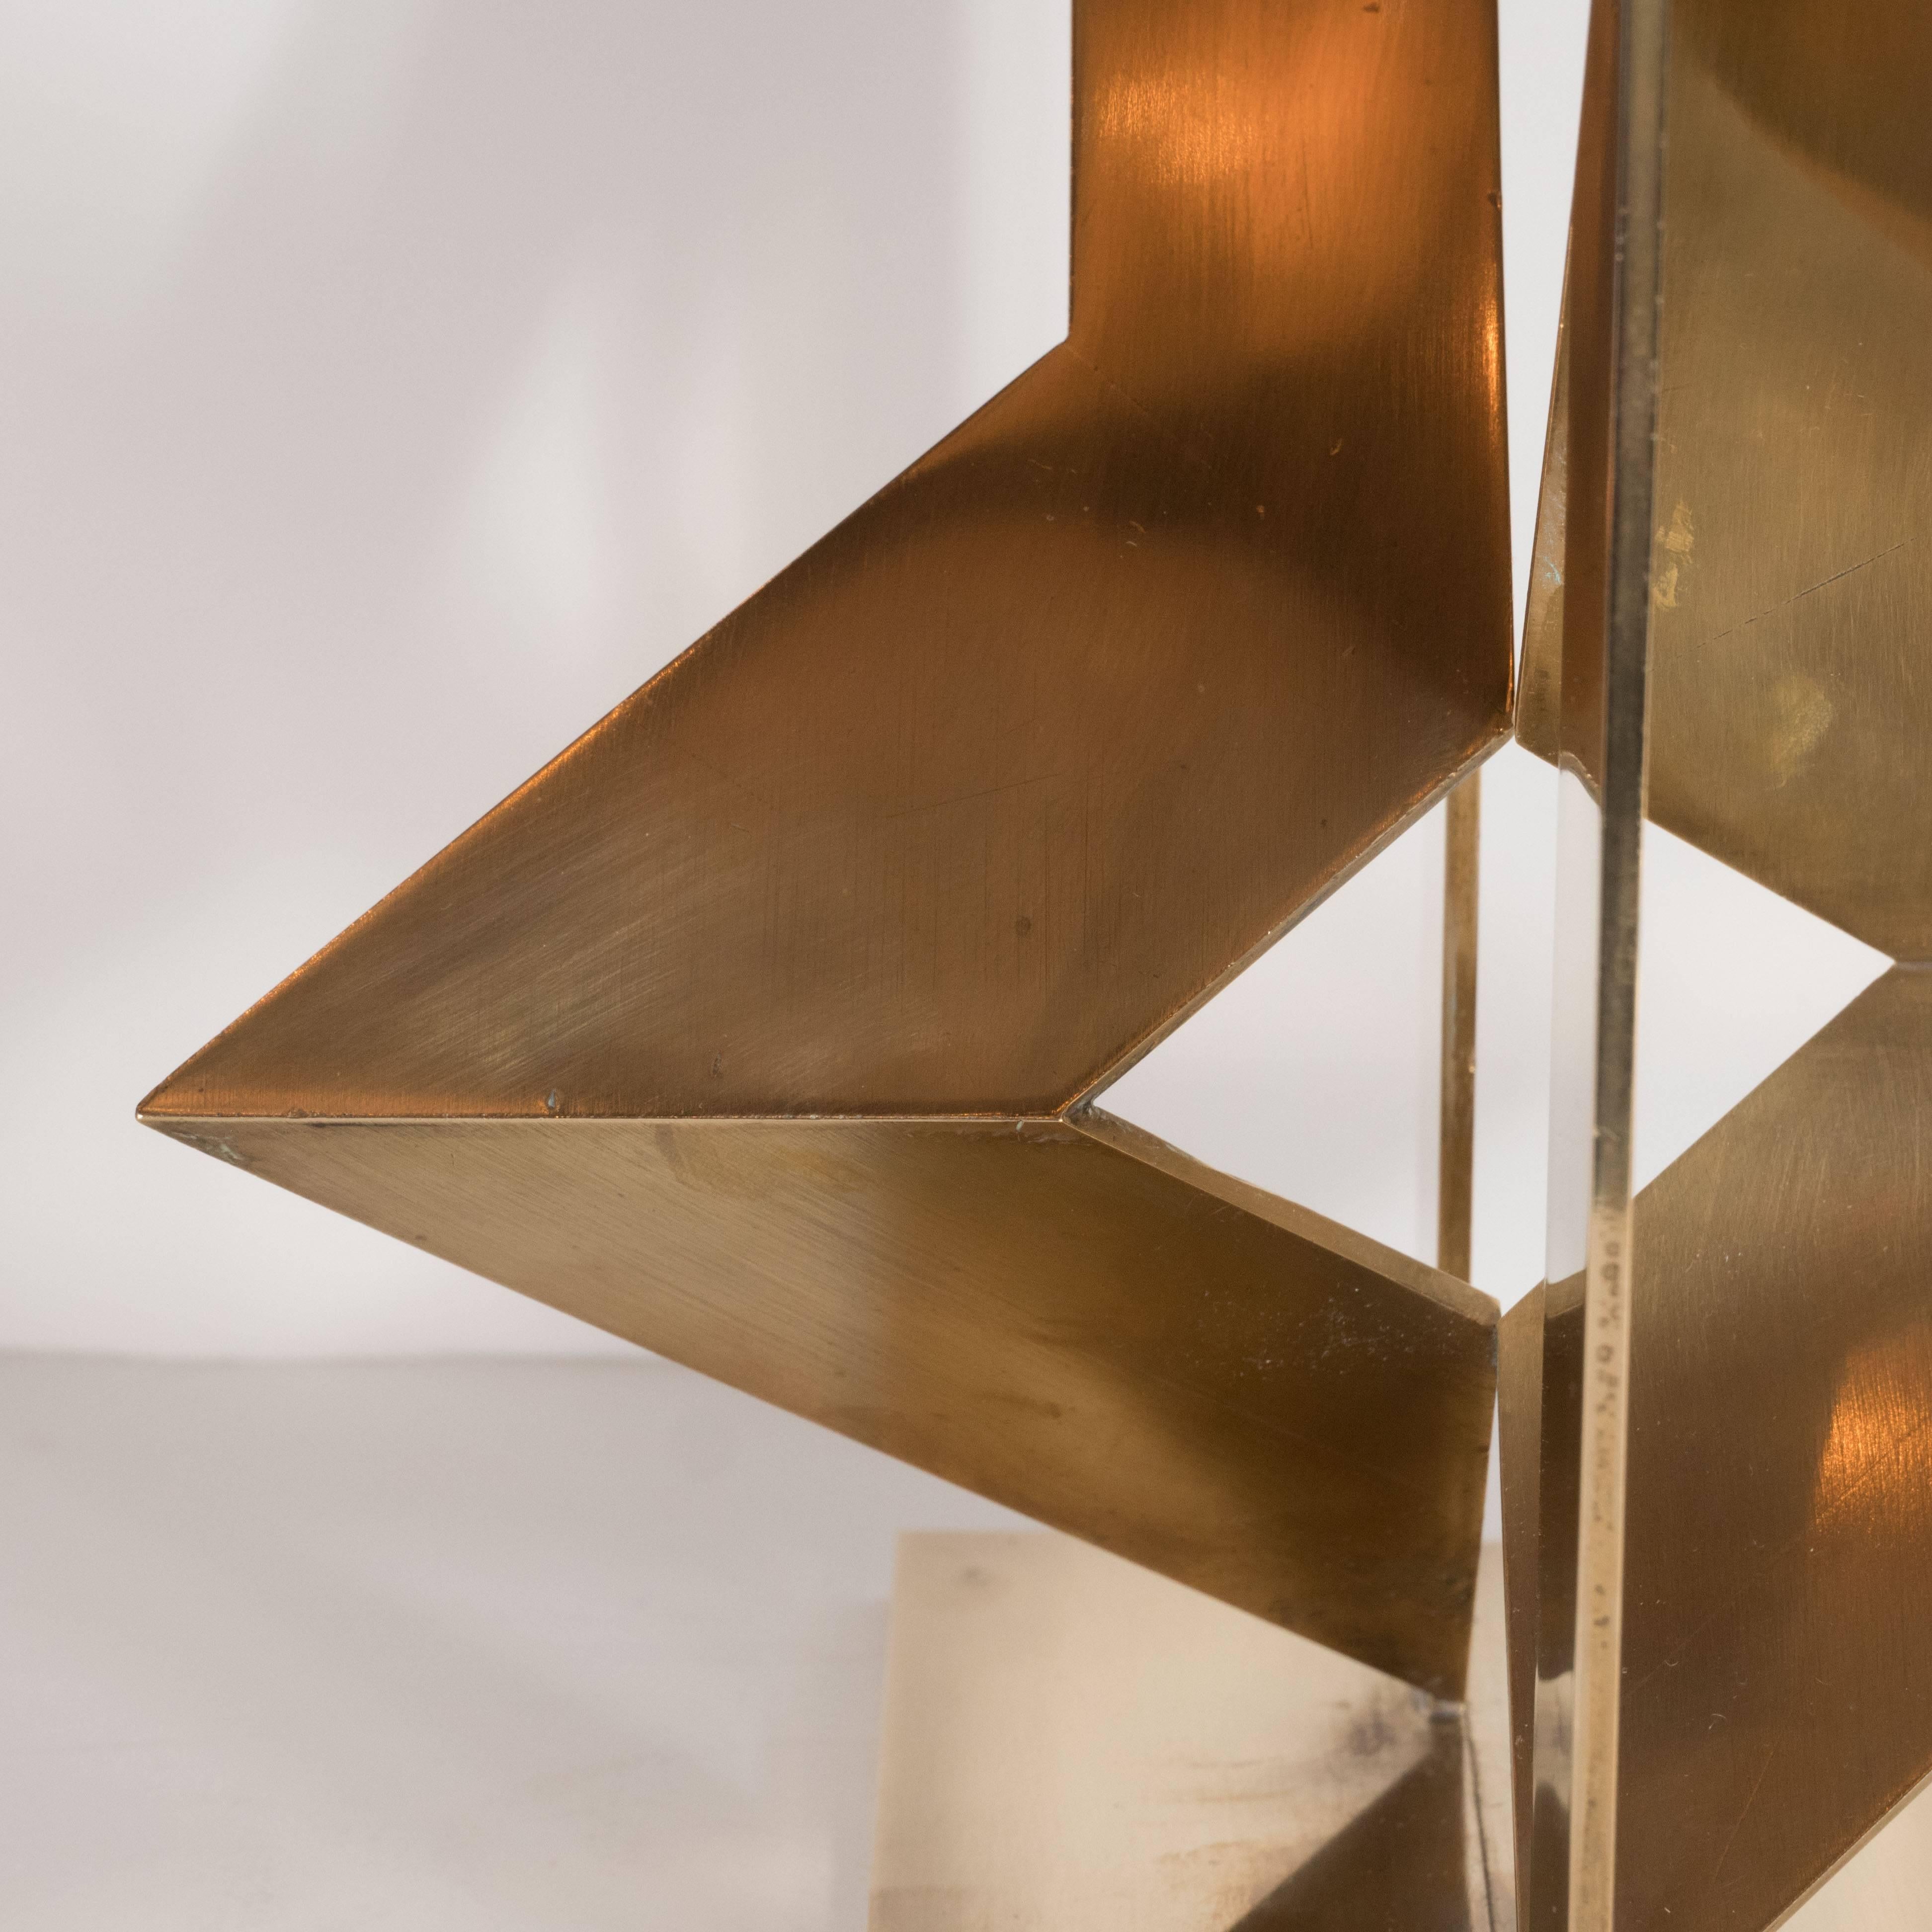 Mexican Mid-Century Modernist Abstract Sculpture by Mathias Goeritz in Polished Brass